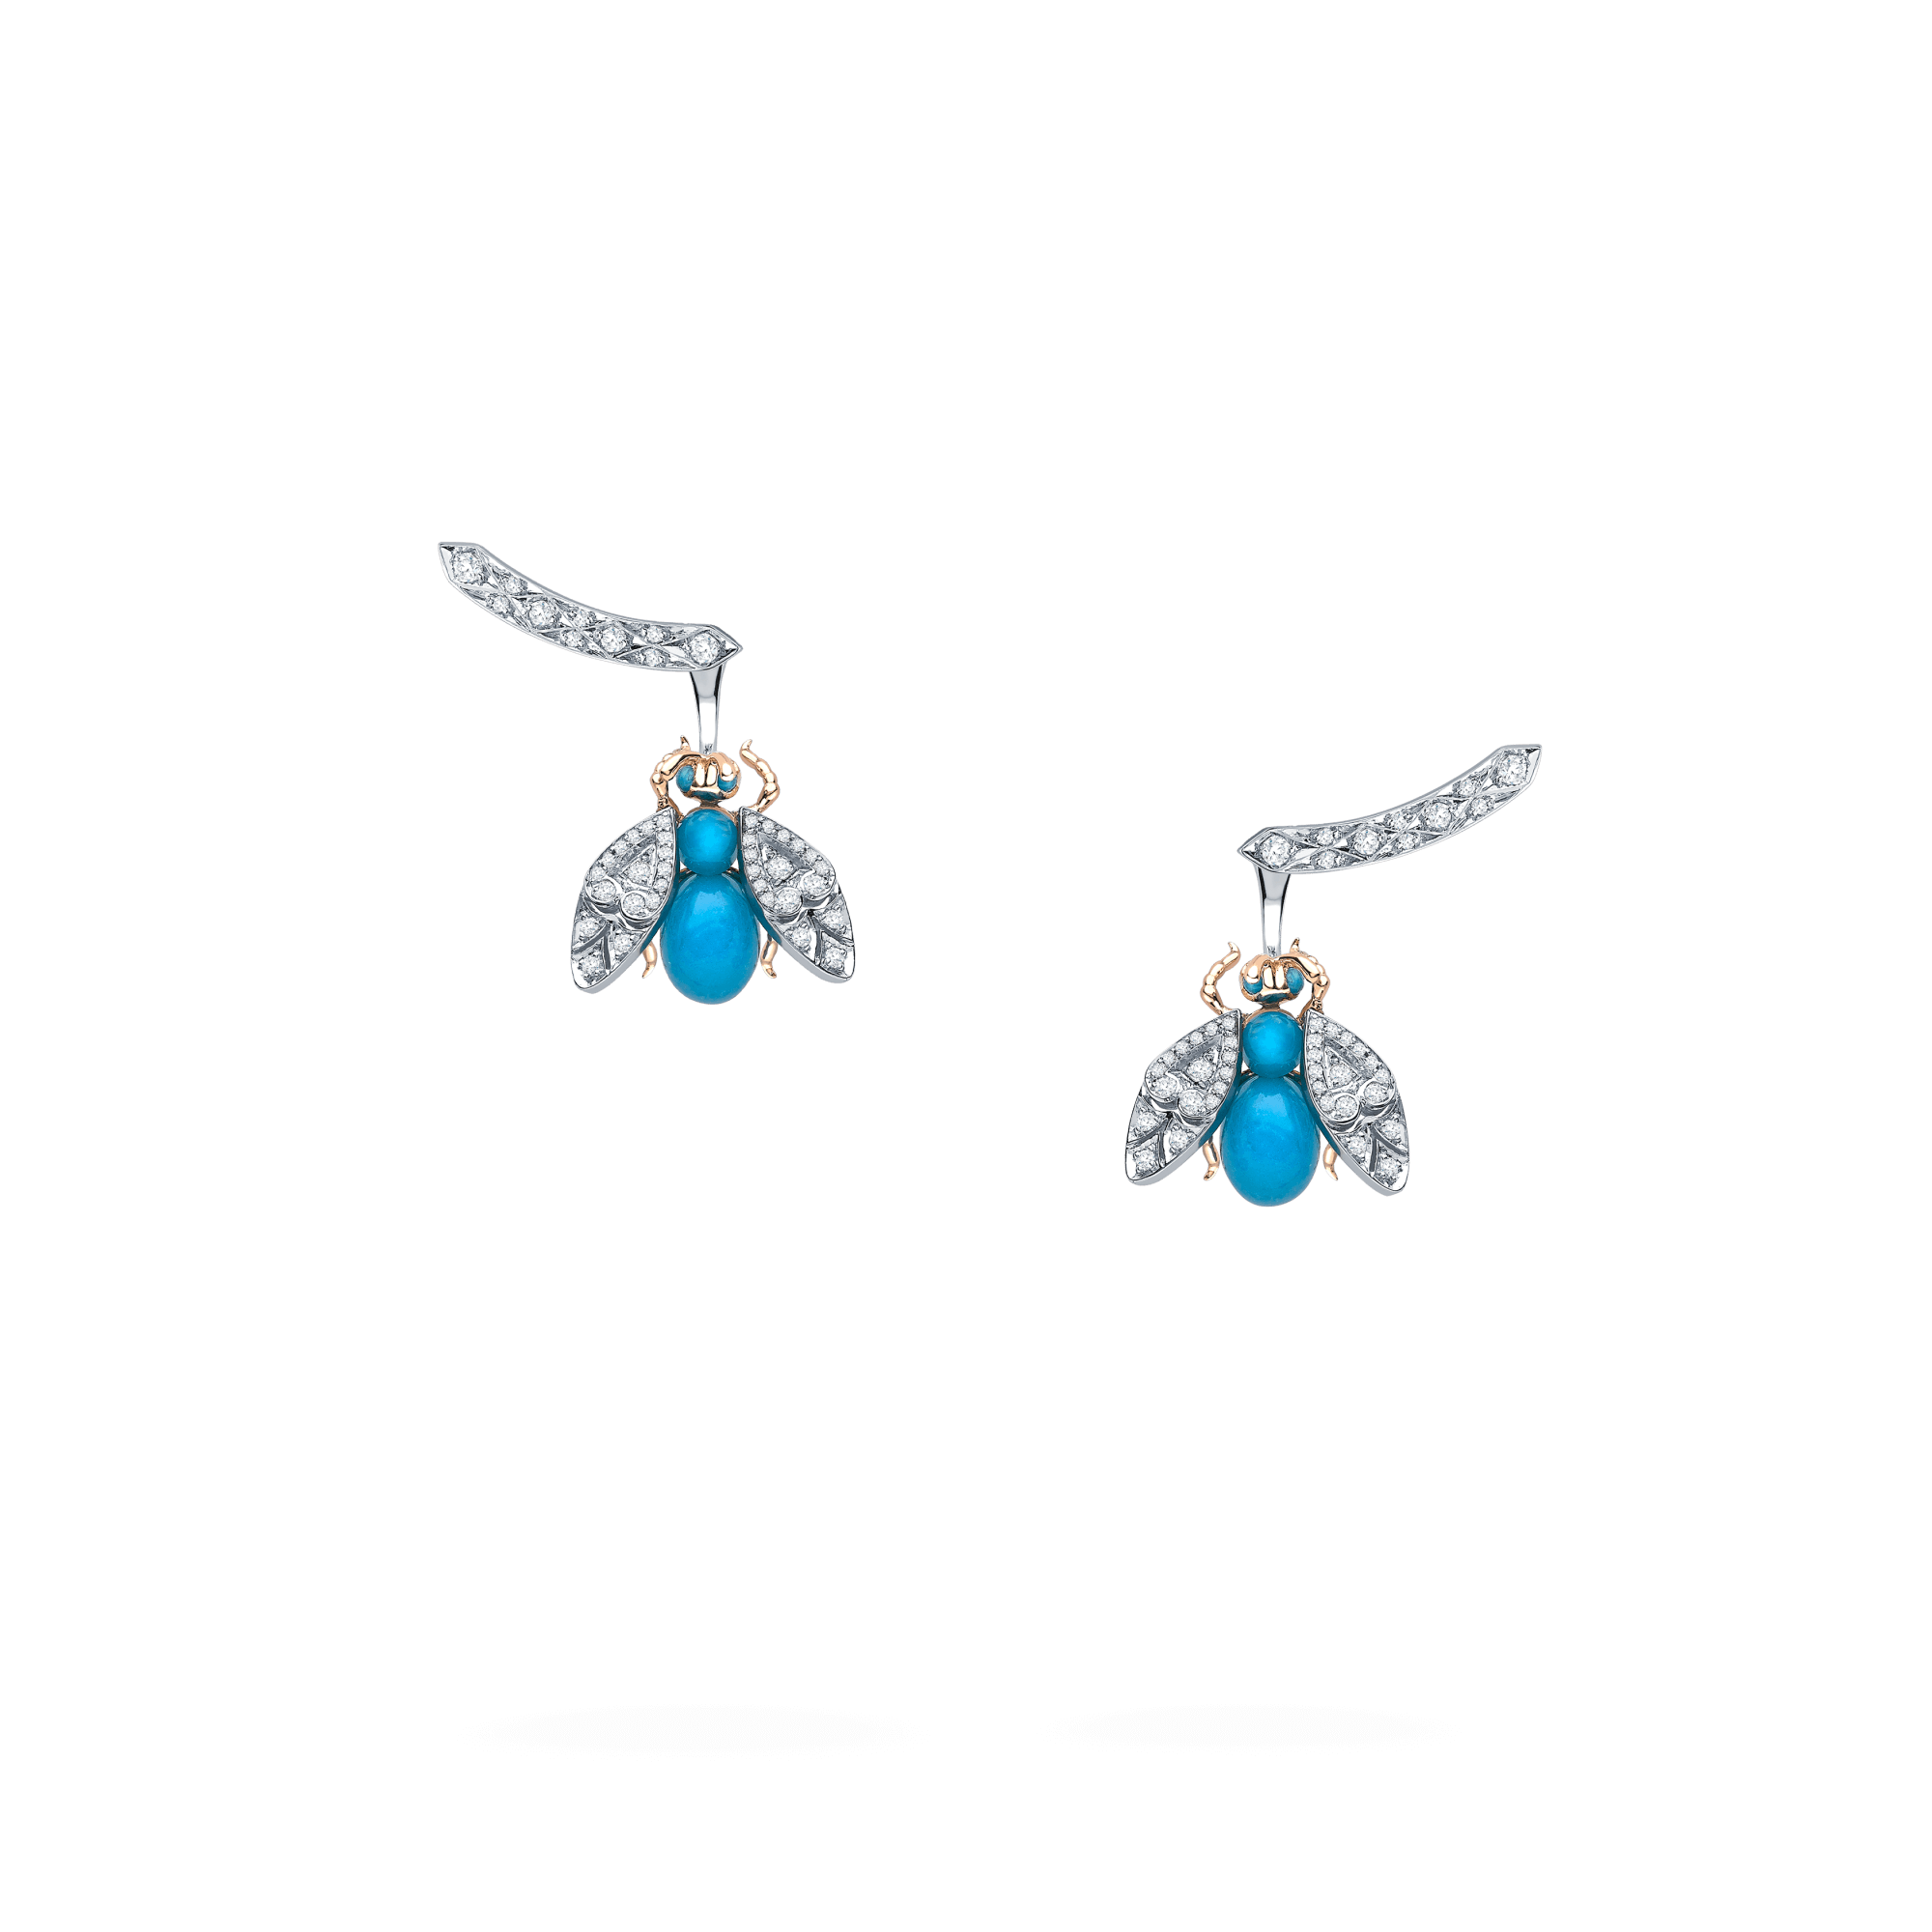 Garrard Enchanted Palace Jewellery Collection Turquoise and Diamond Bug Earrings | In 18ct White Gold 2014738